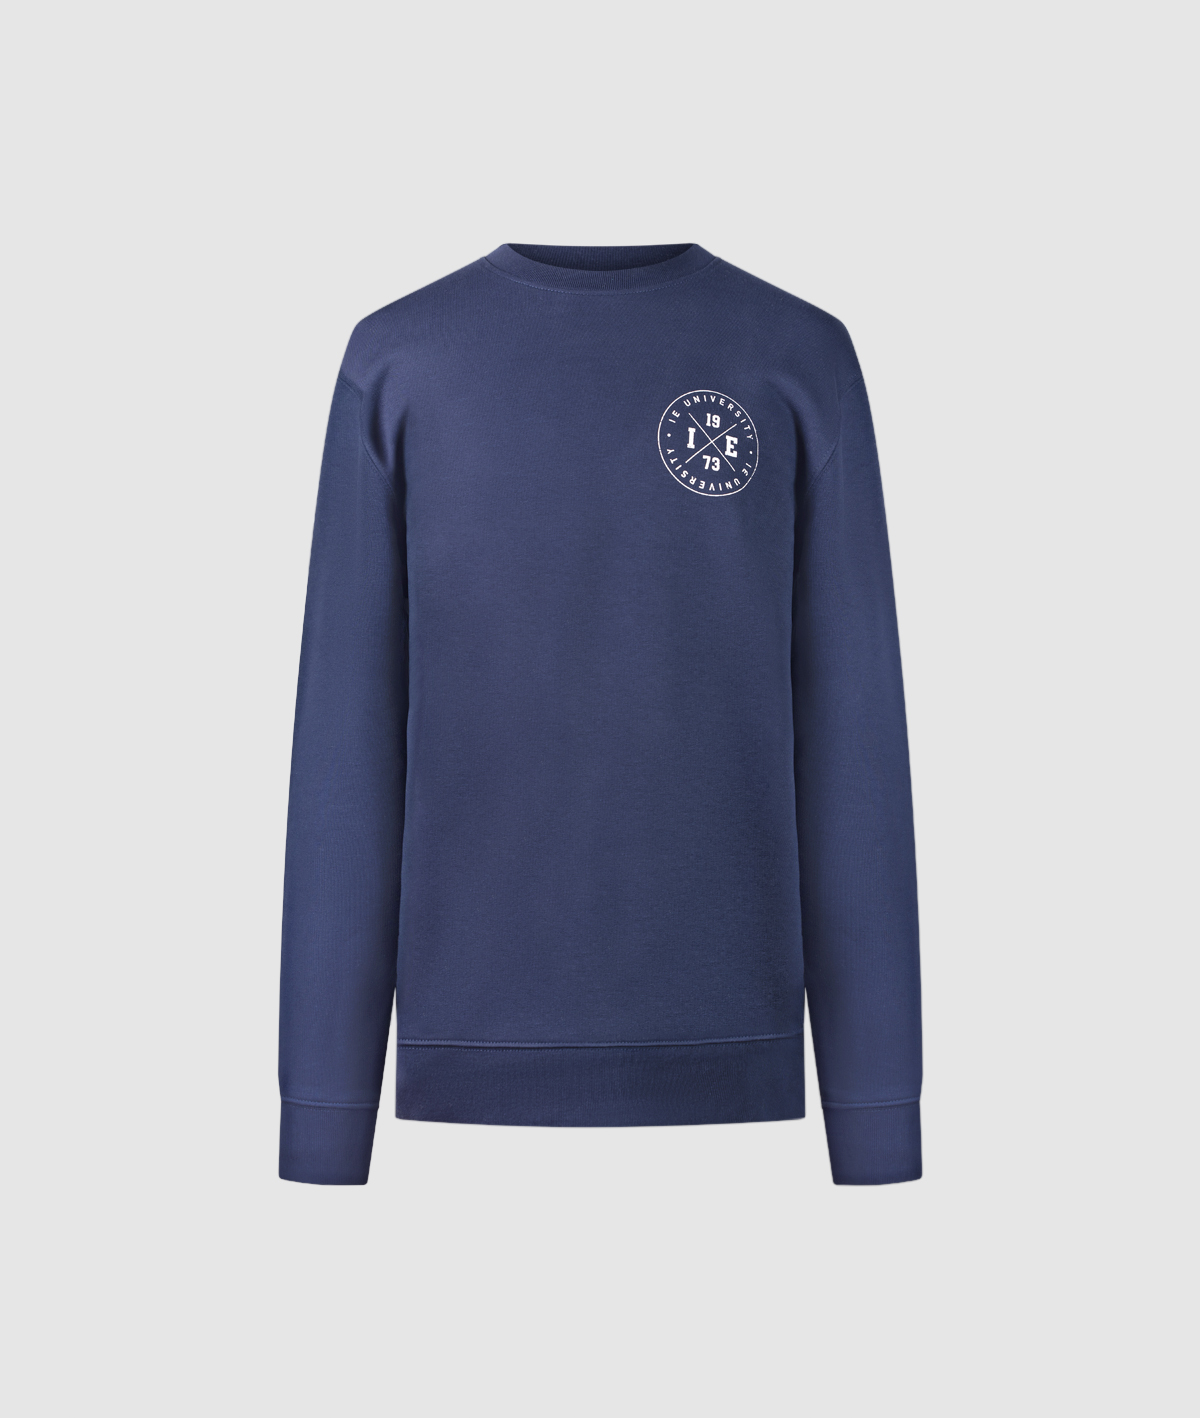 Changer SM IEU Sweatshirt. french navy colour front